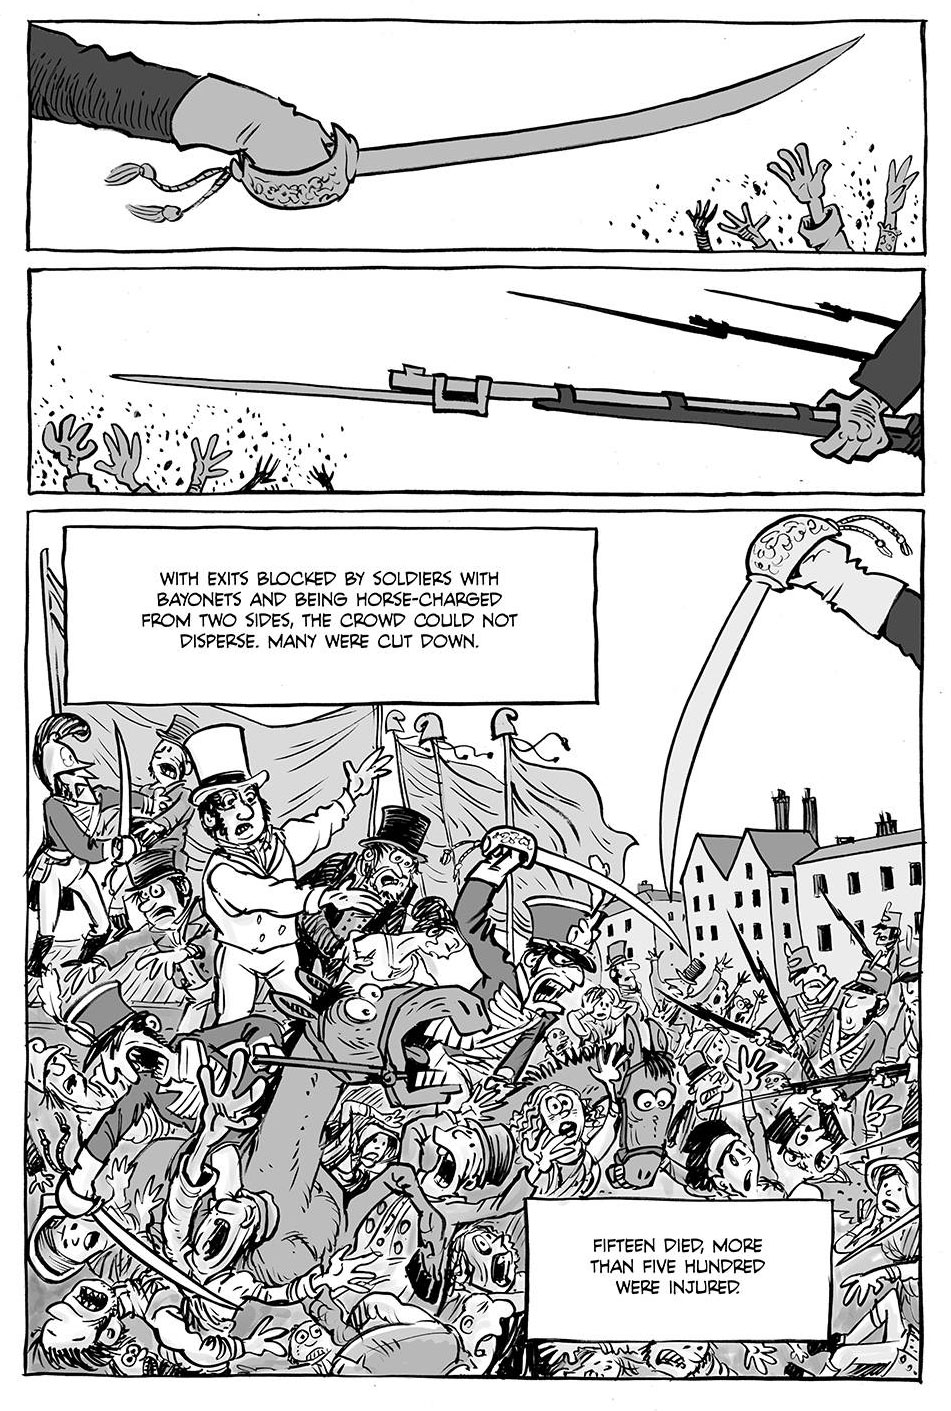 A page from the Peterloo chapter in Fight The Power, by Ben Dickson and Hunt Emerson